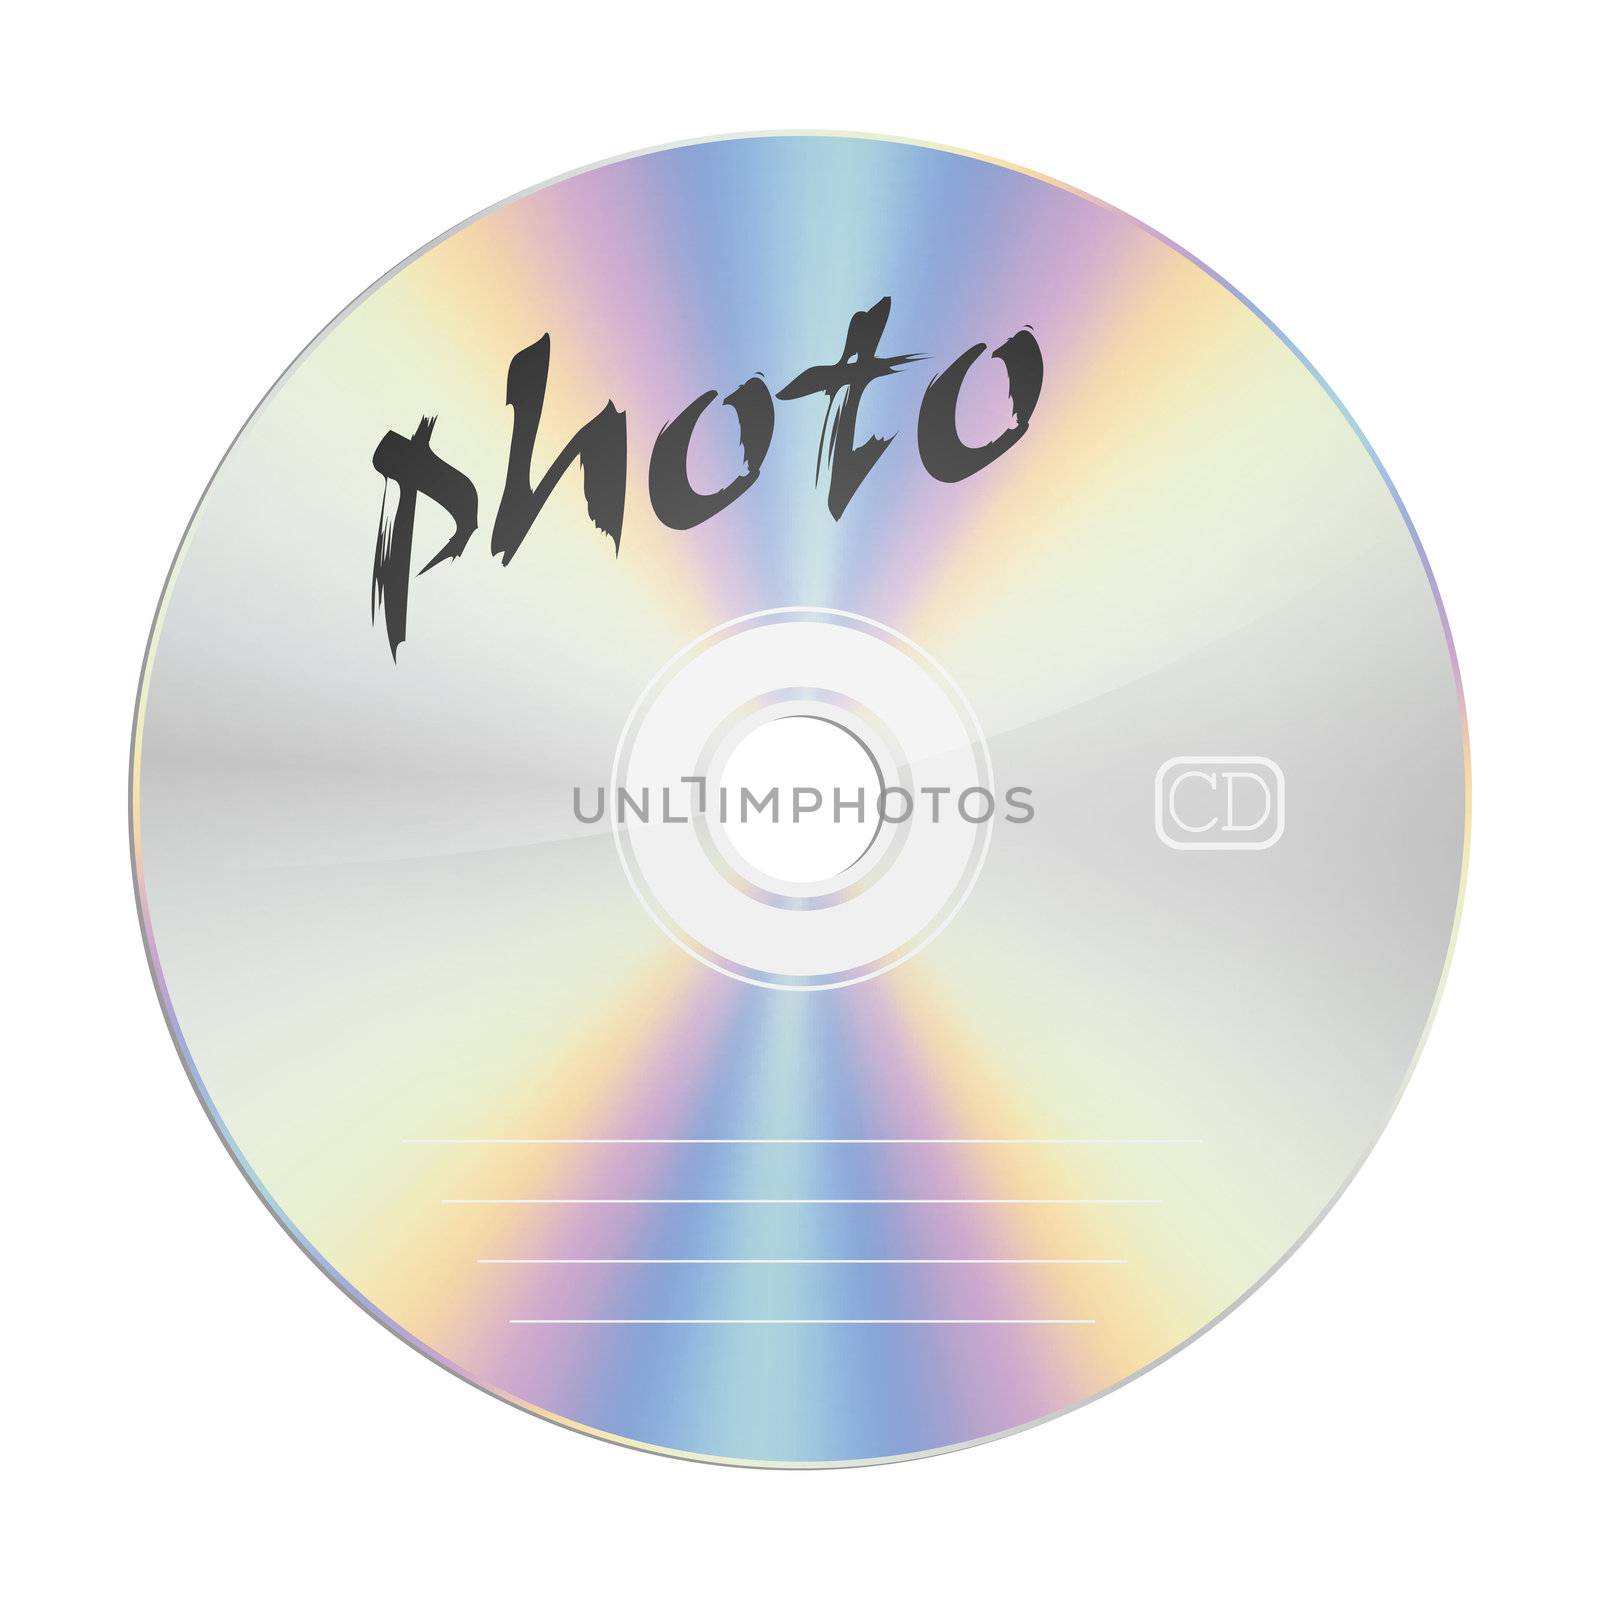 An image of a security compact disc photo